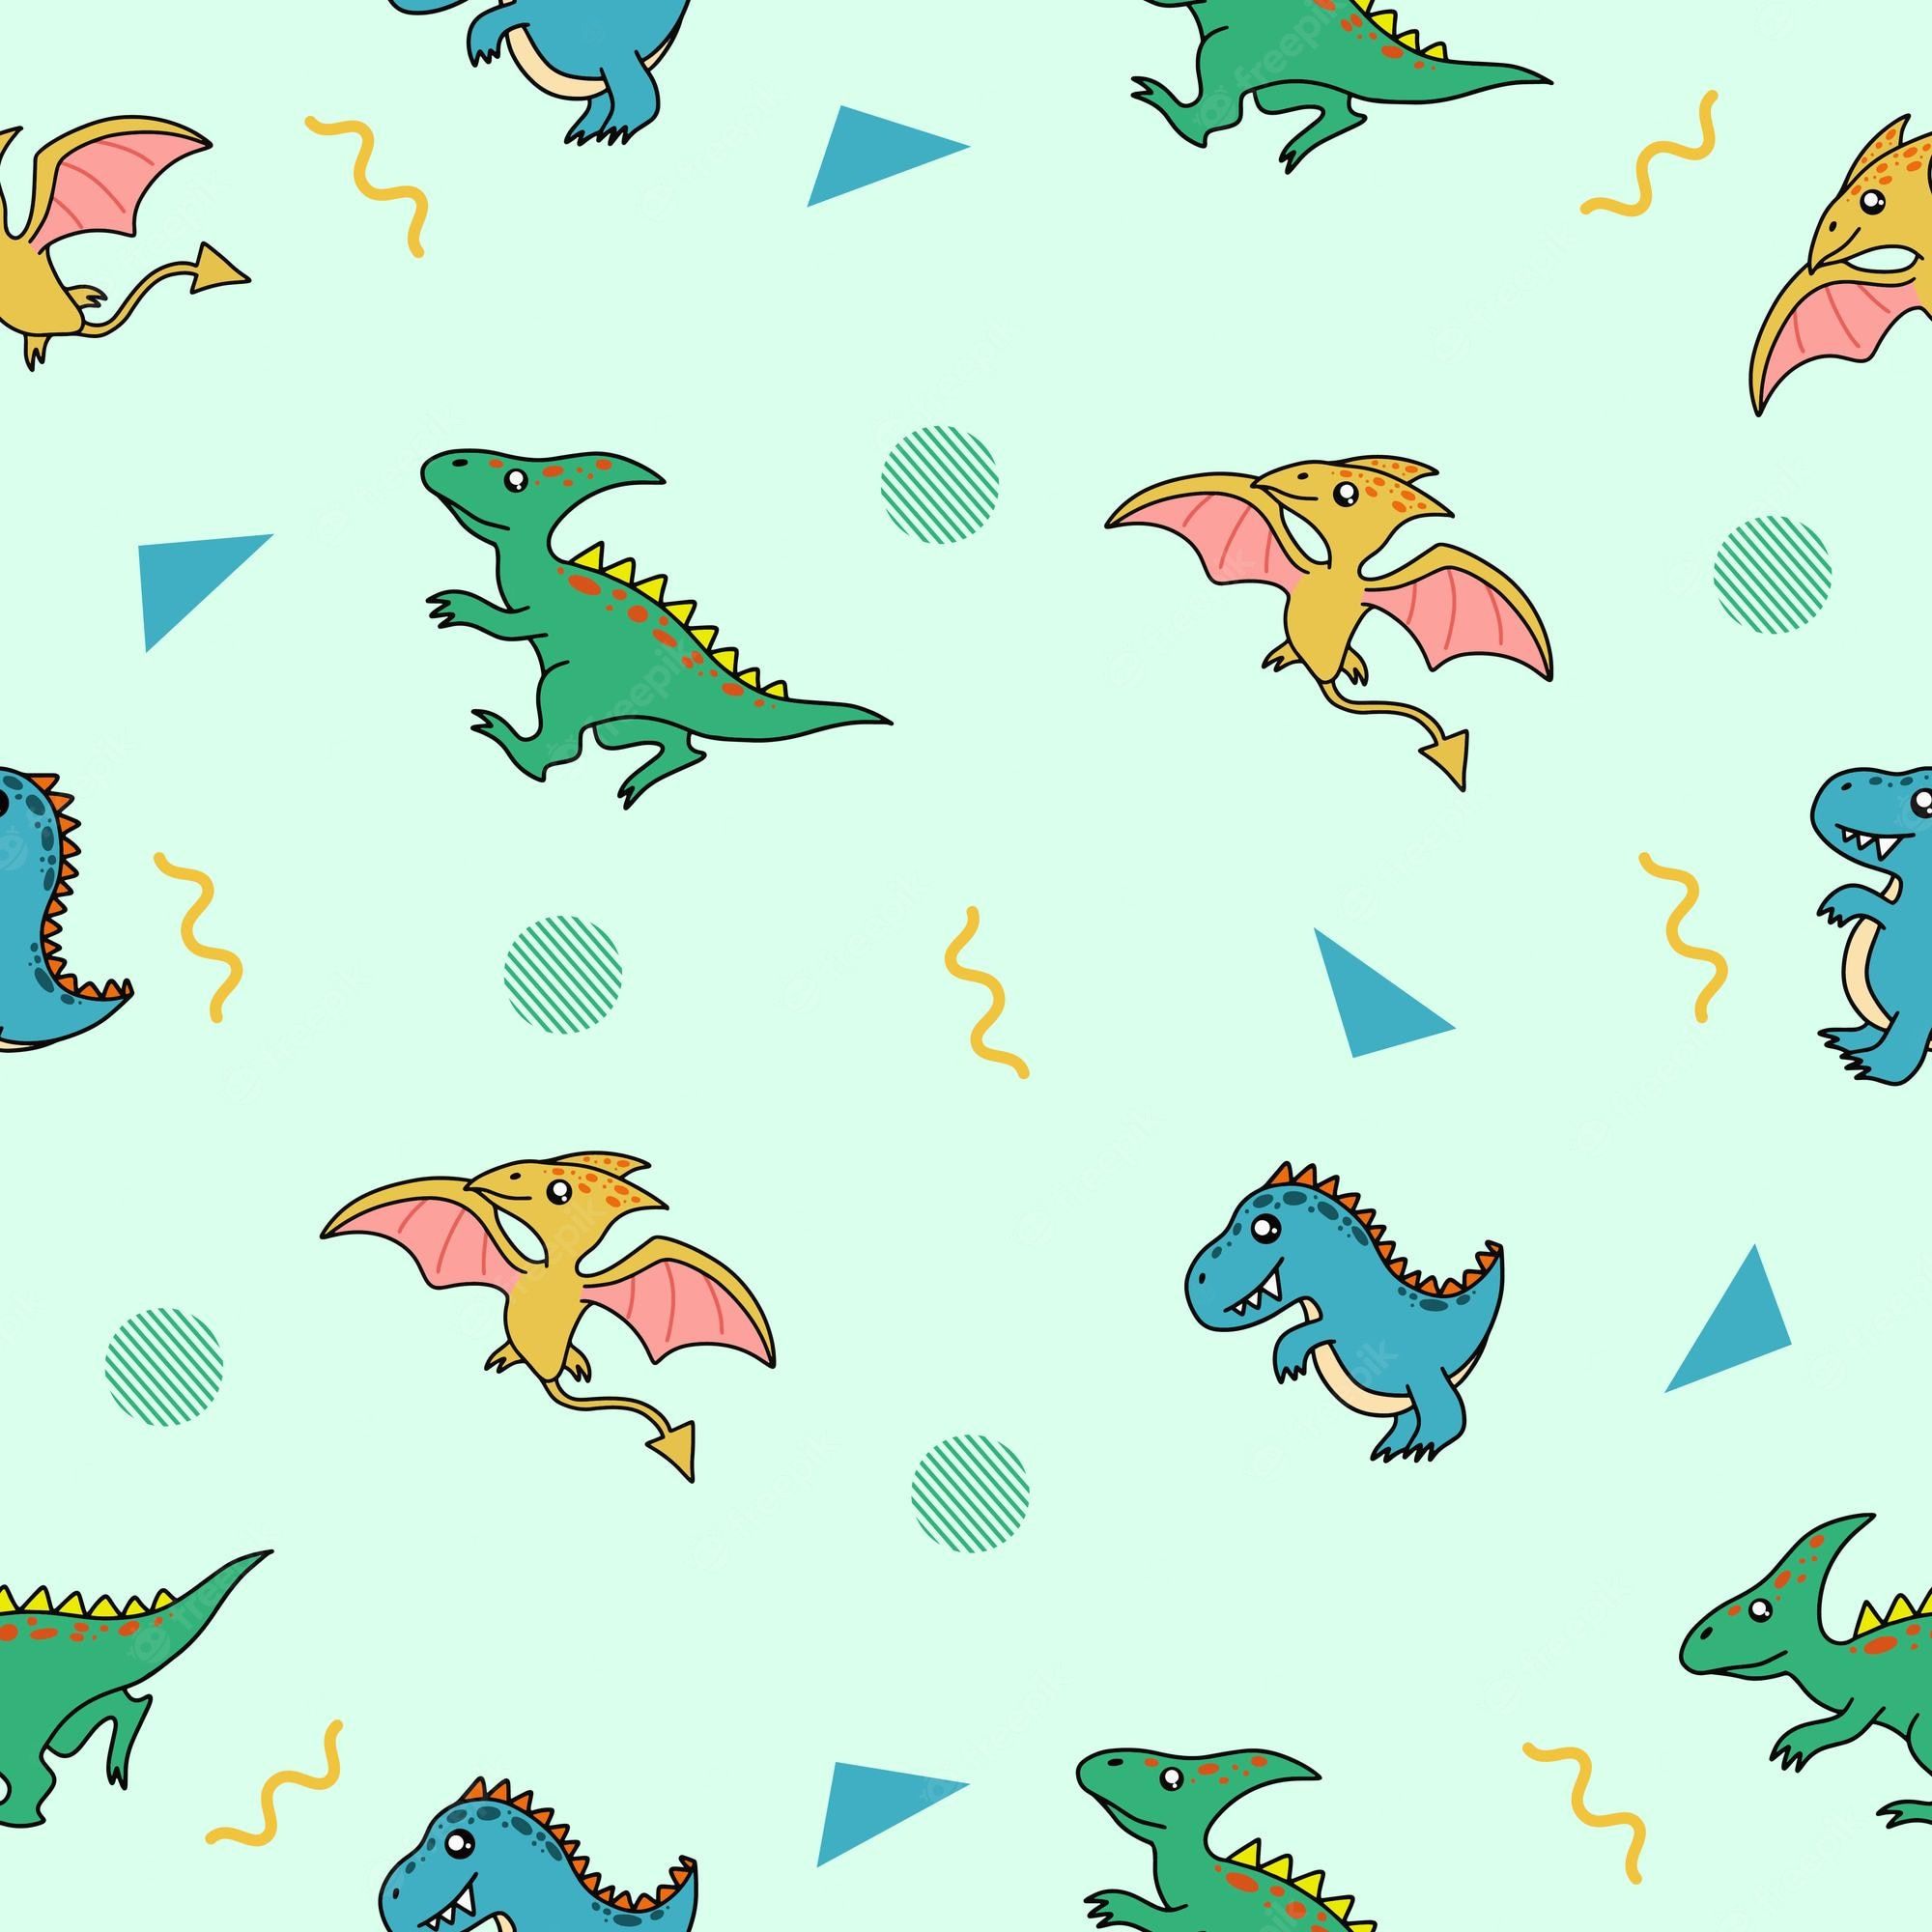 Premium Vector. Cute many colorful dinosaur animal seamless pattern colorful object wallpaper with design greenish blue